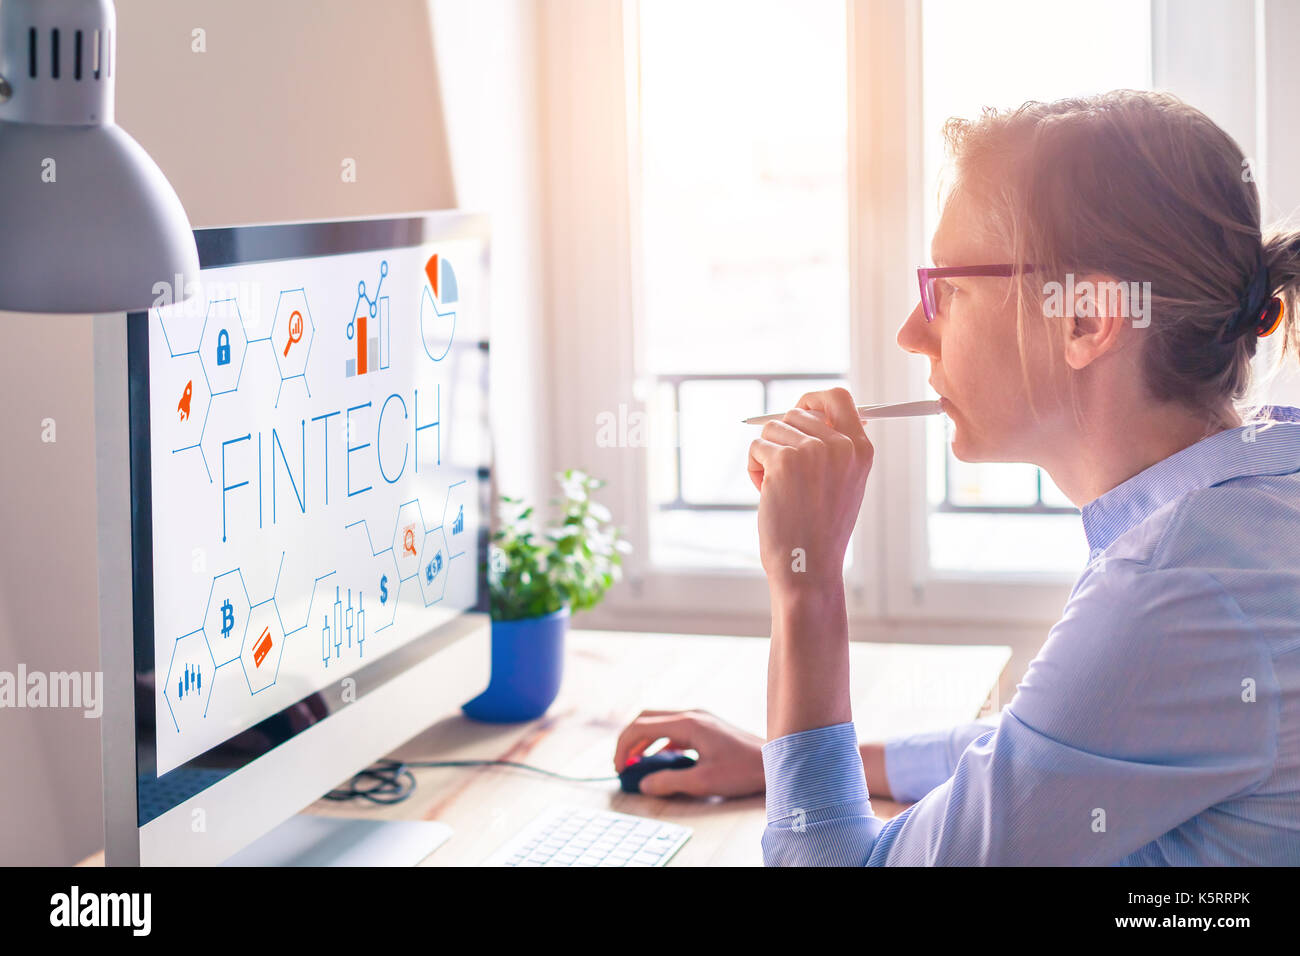 Fintech concept on computer screen with modern interface and innovative charts, female business person at office Stock Photo